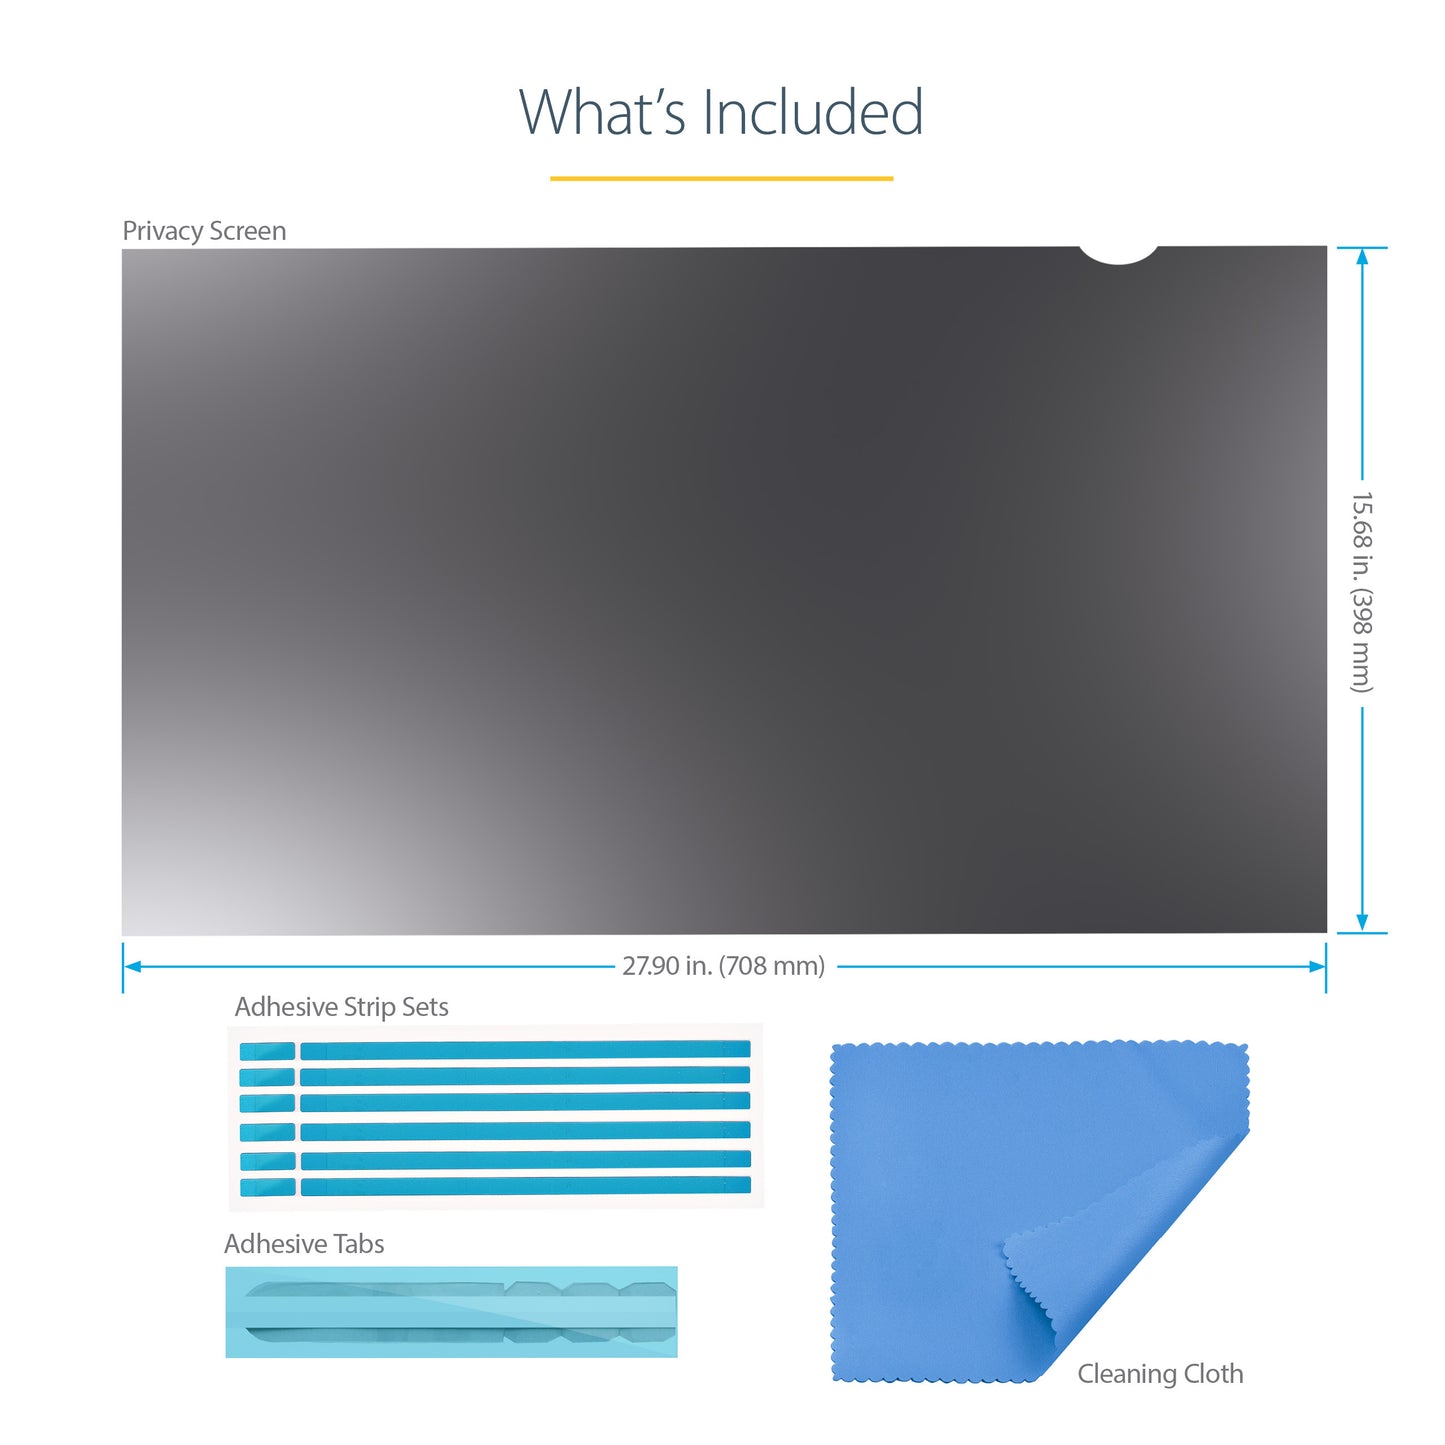 StarTech.com Monitor Privacy Screen for 32 inch PC Display - Computer Screen Security Filter - Blue Light Reducing Screen Protector Film - 16:9 Widescreen - Matte/Glossy - +/-30 Degree-14